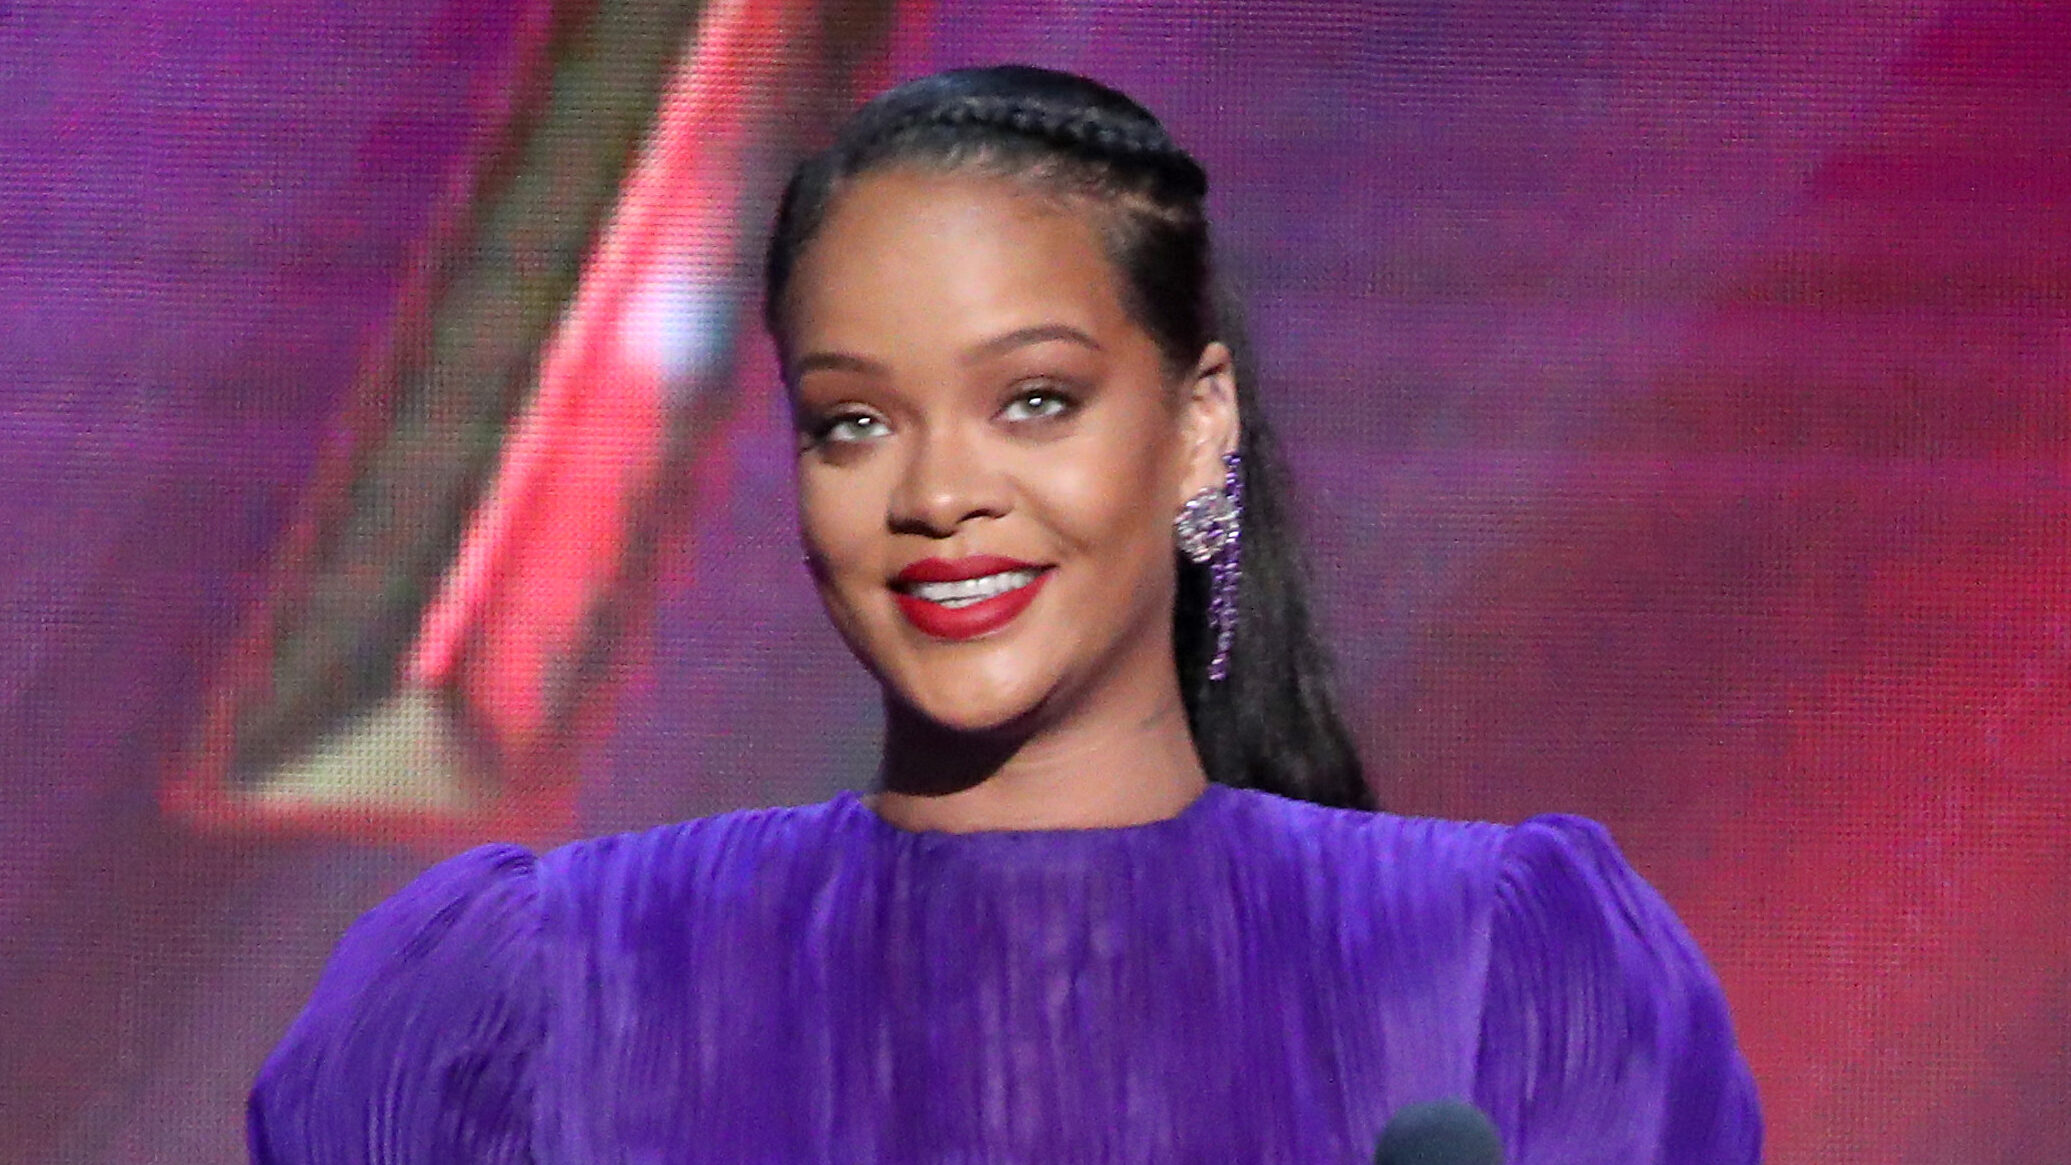 Rihanna to Perform at Super Bowl Halftime Show in Arizona